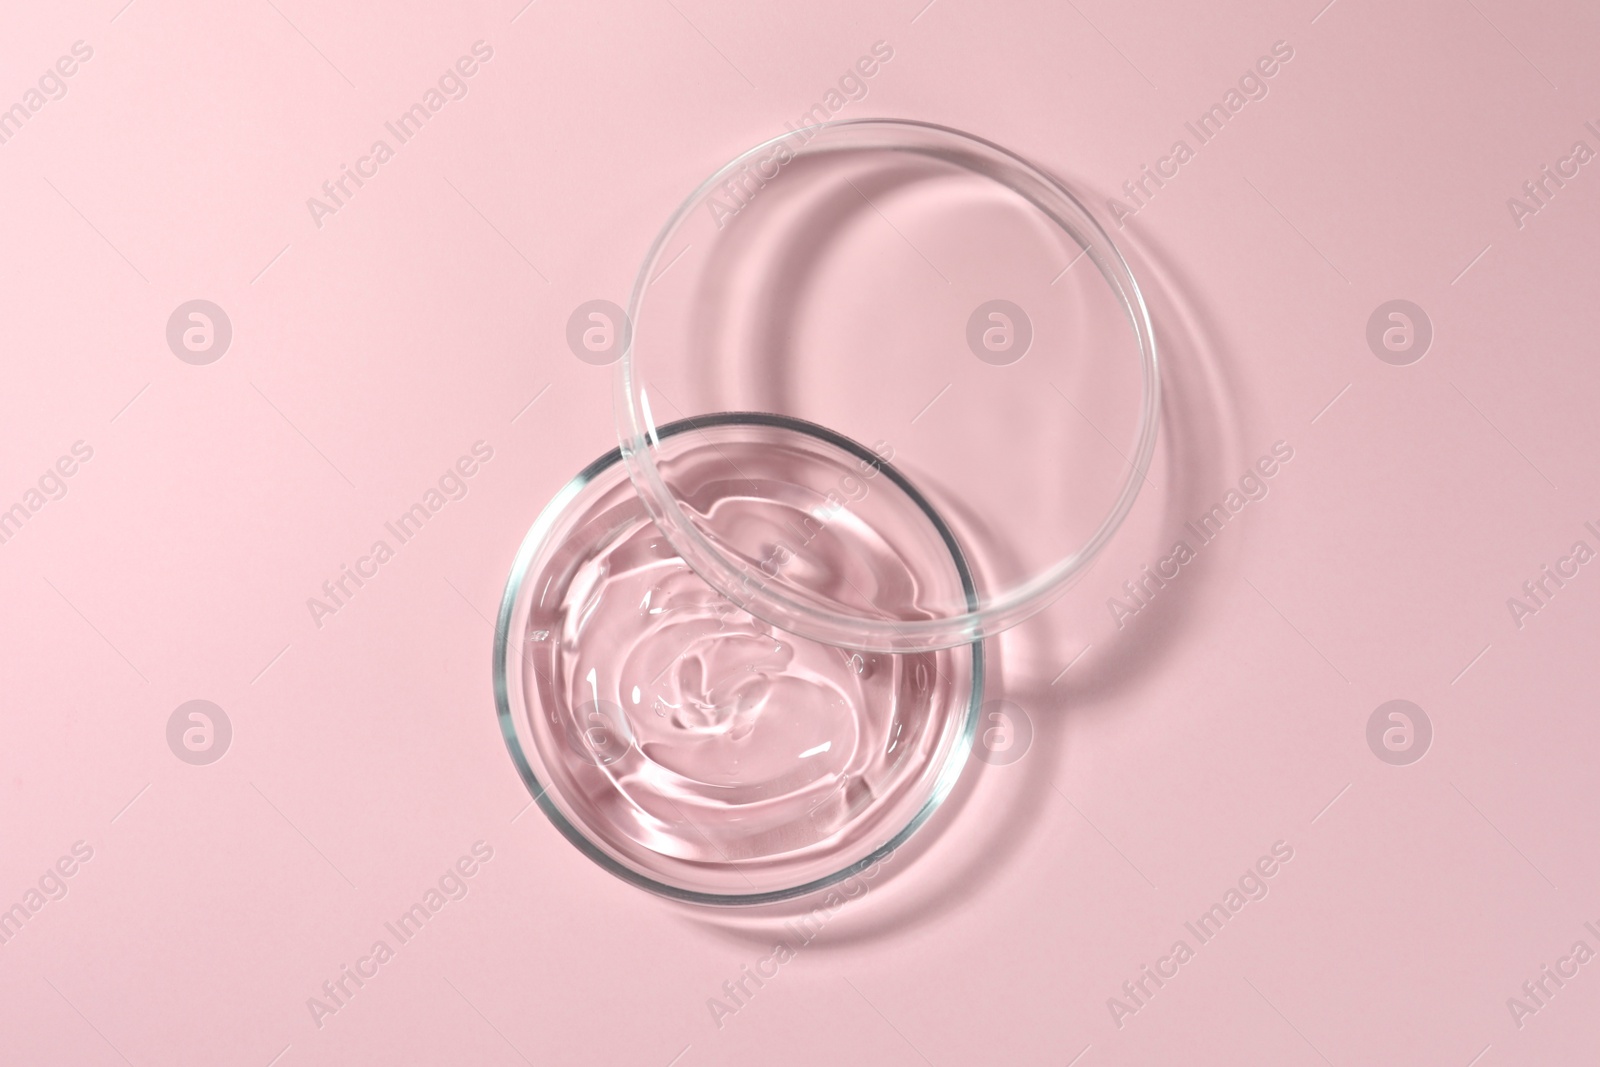 Photo of Petri dish with liquid and lid on pale pink background, flat lay